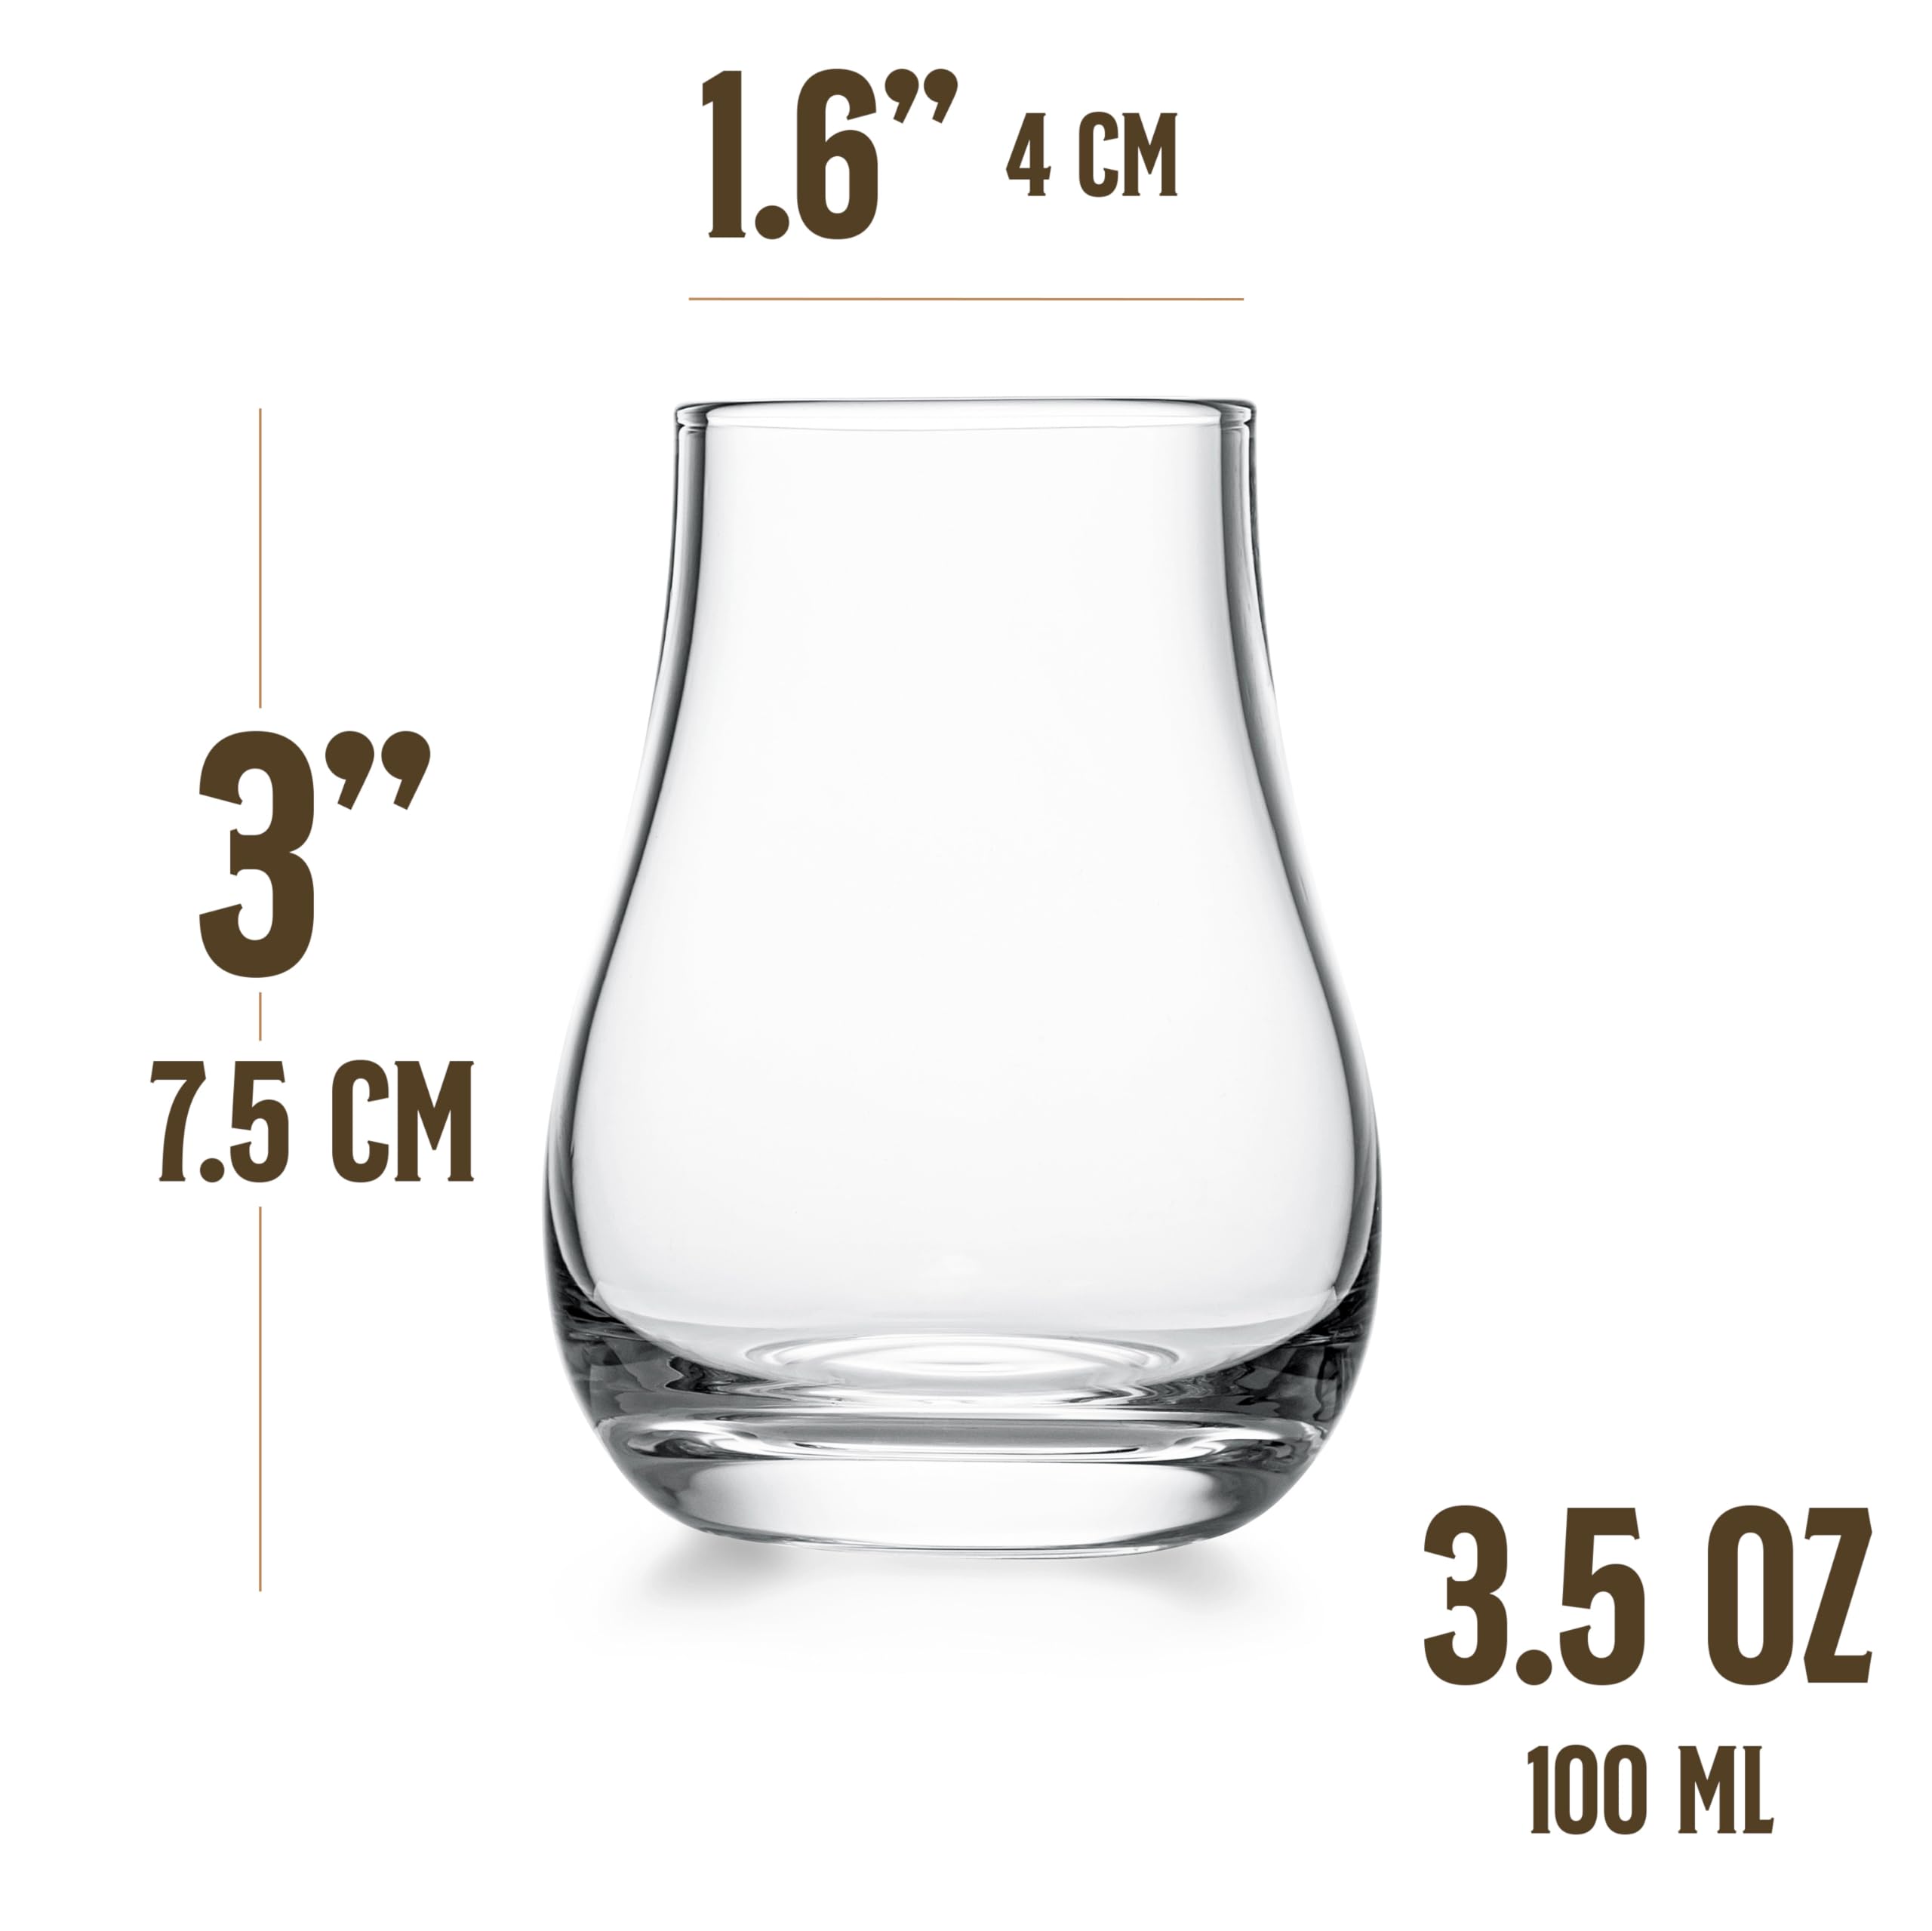 Whiskey, Scotch, Bourbon Tasting Glasses | Set of 6 | Professional 3.5 oz Stemless Tulip Shaped Tasting and Nosing Copitas | Small Crystal Snifters Gift Sniffers for Sipping Neat Liquor